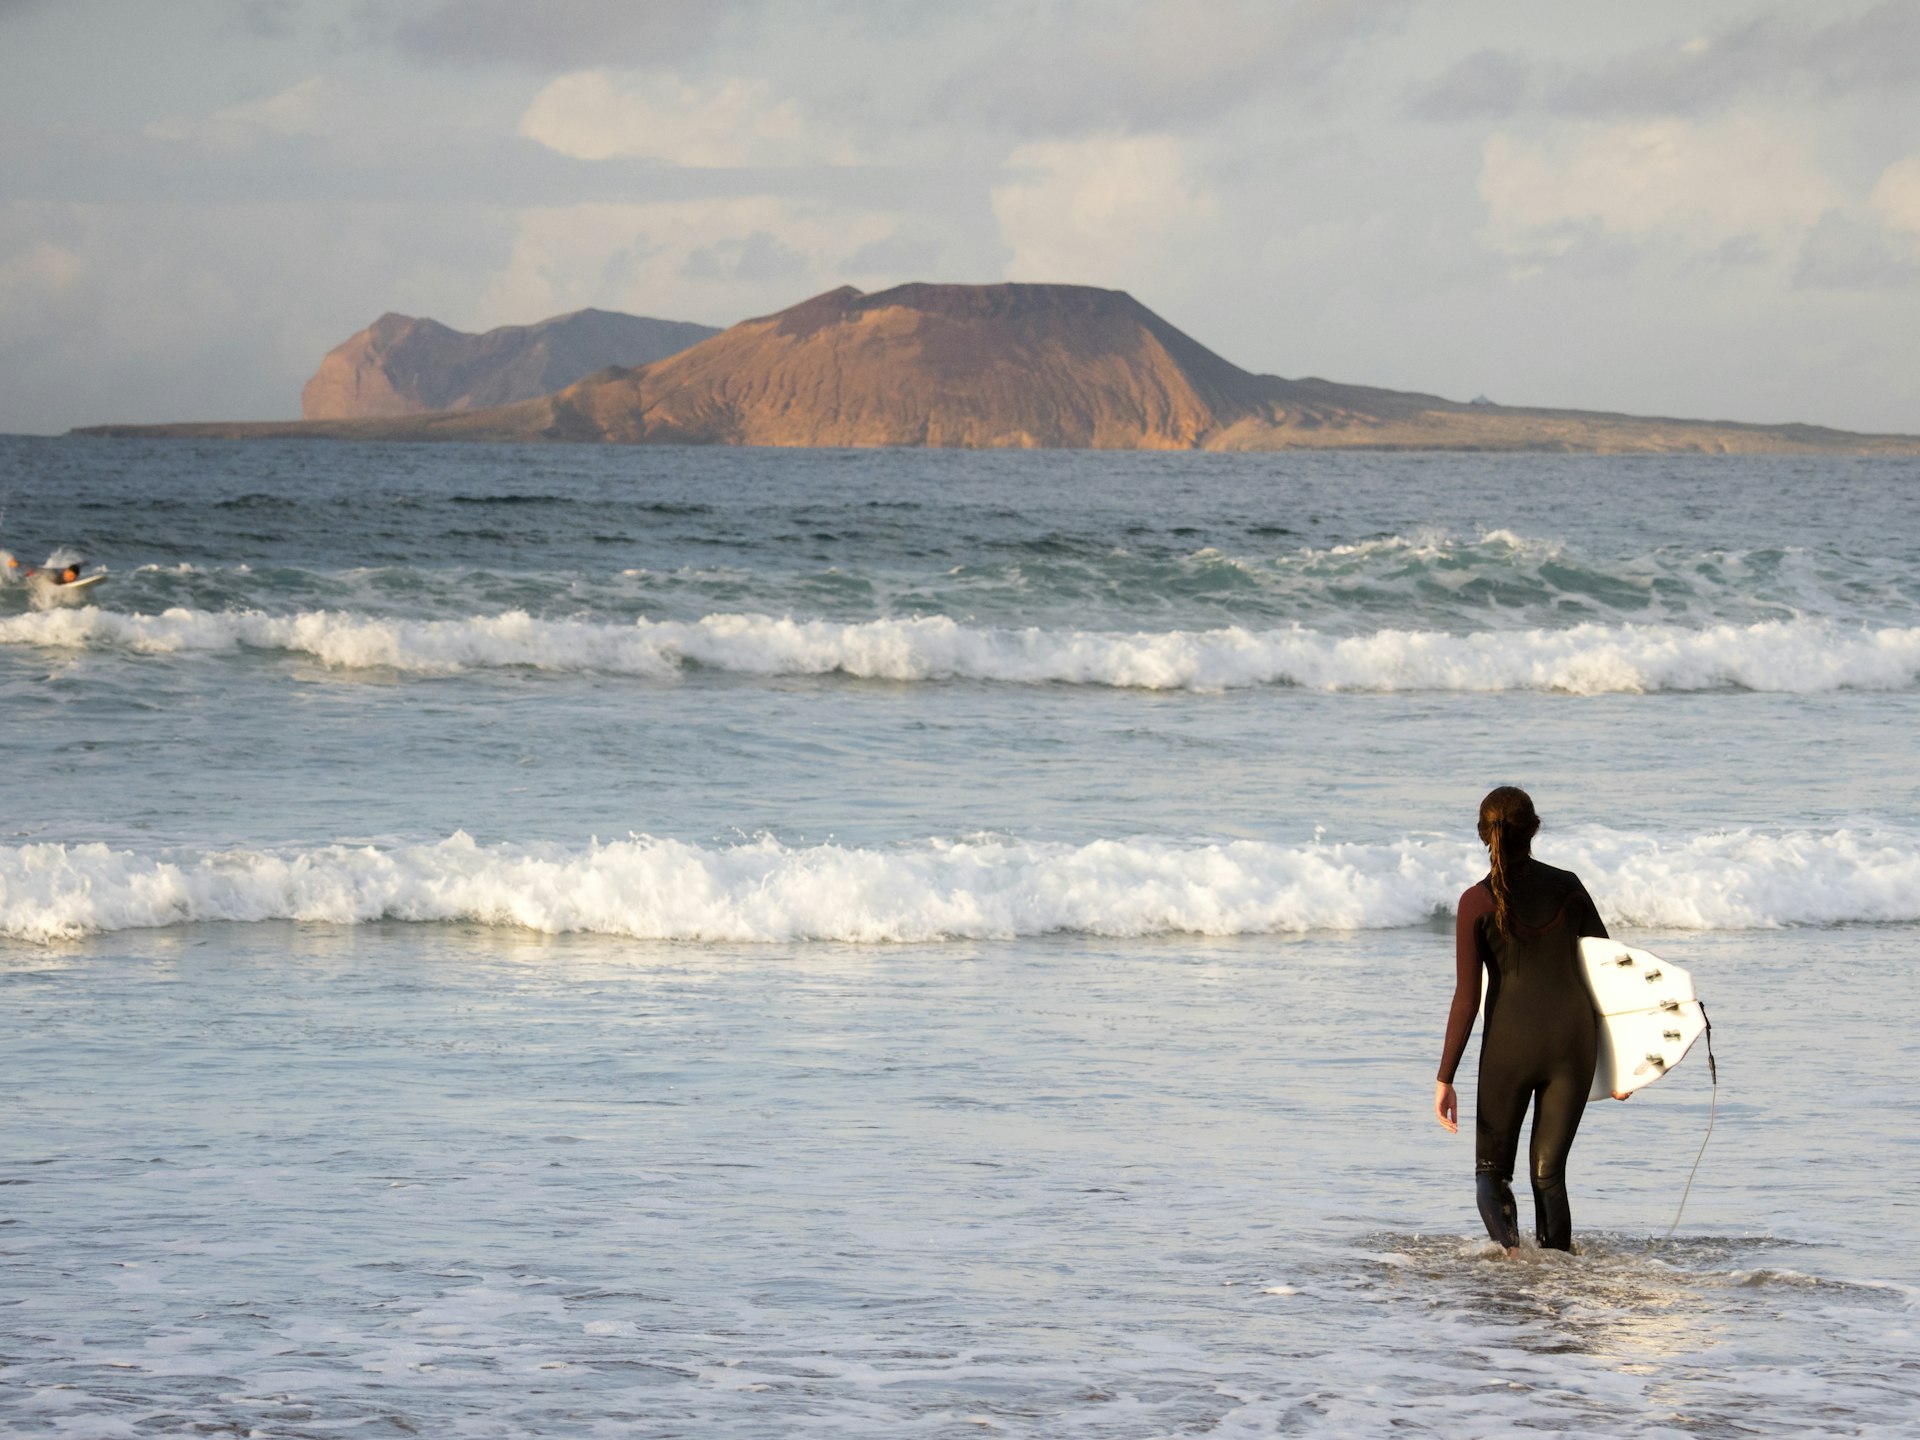 Surfer walks into the water at the beach of Famara, with the La Graciosa Island in the background, Lanzarote, Canary Islands, Spain